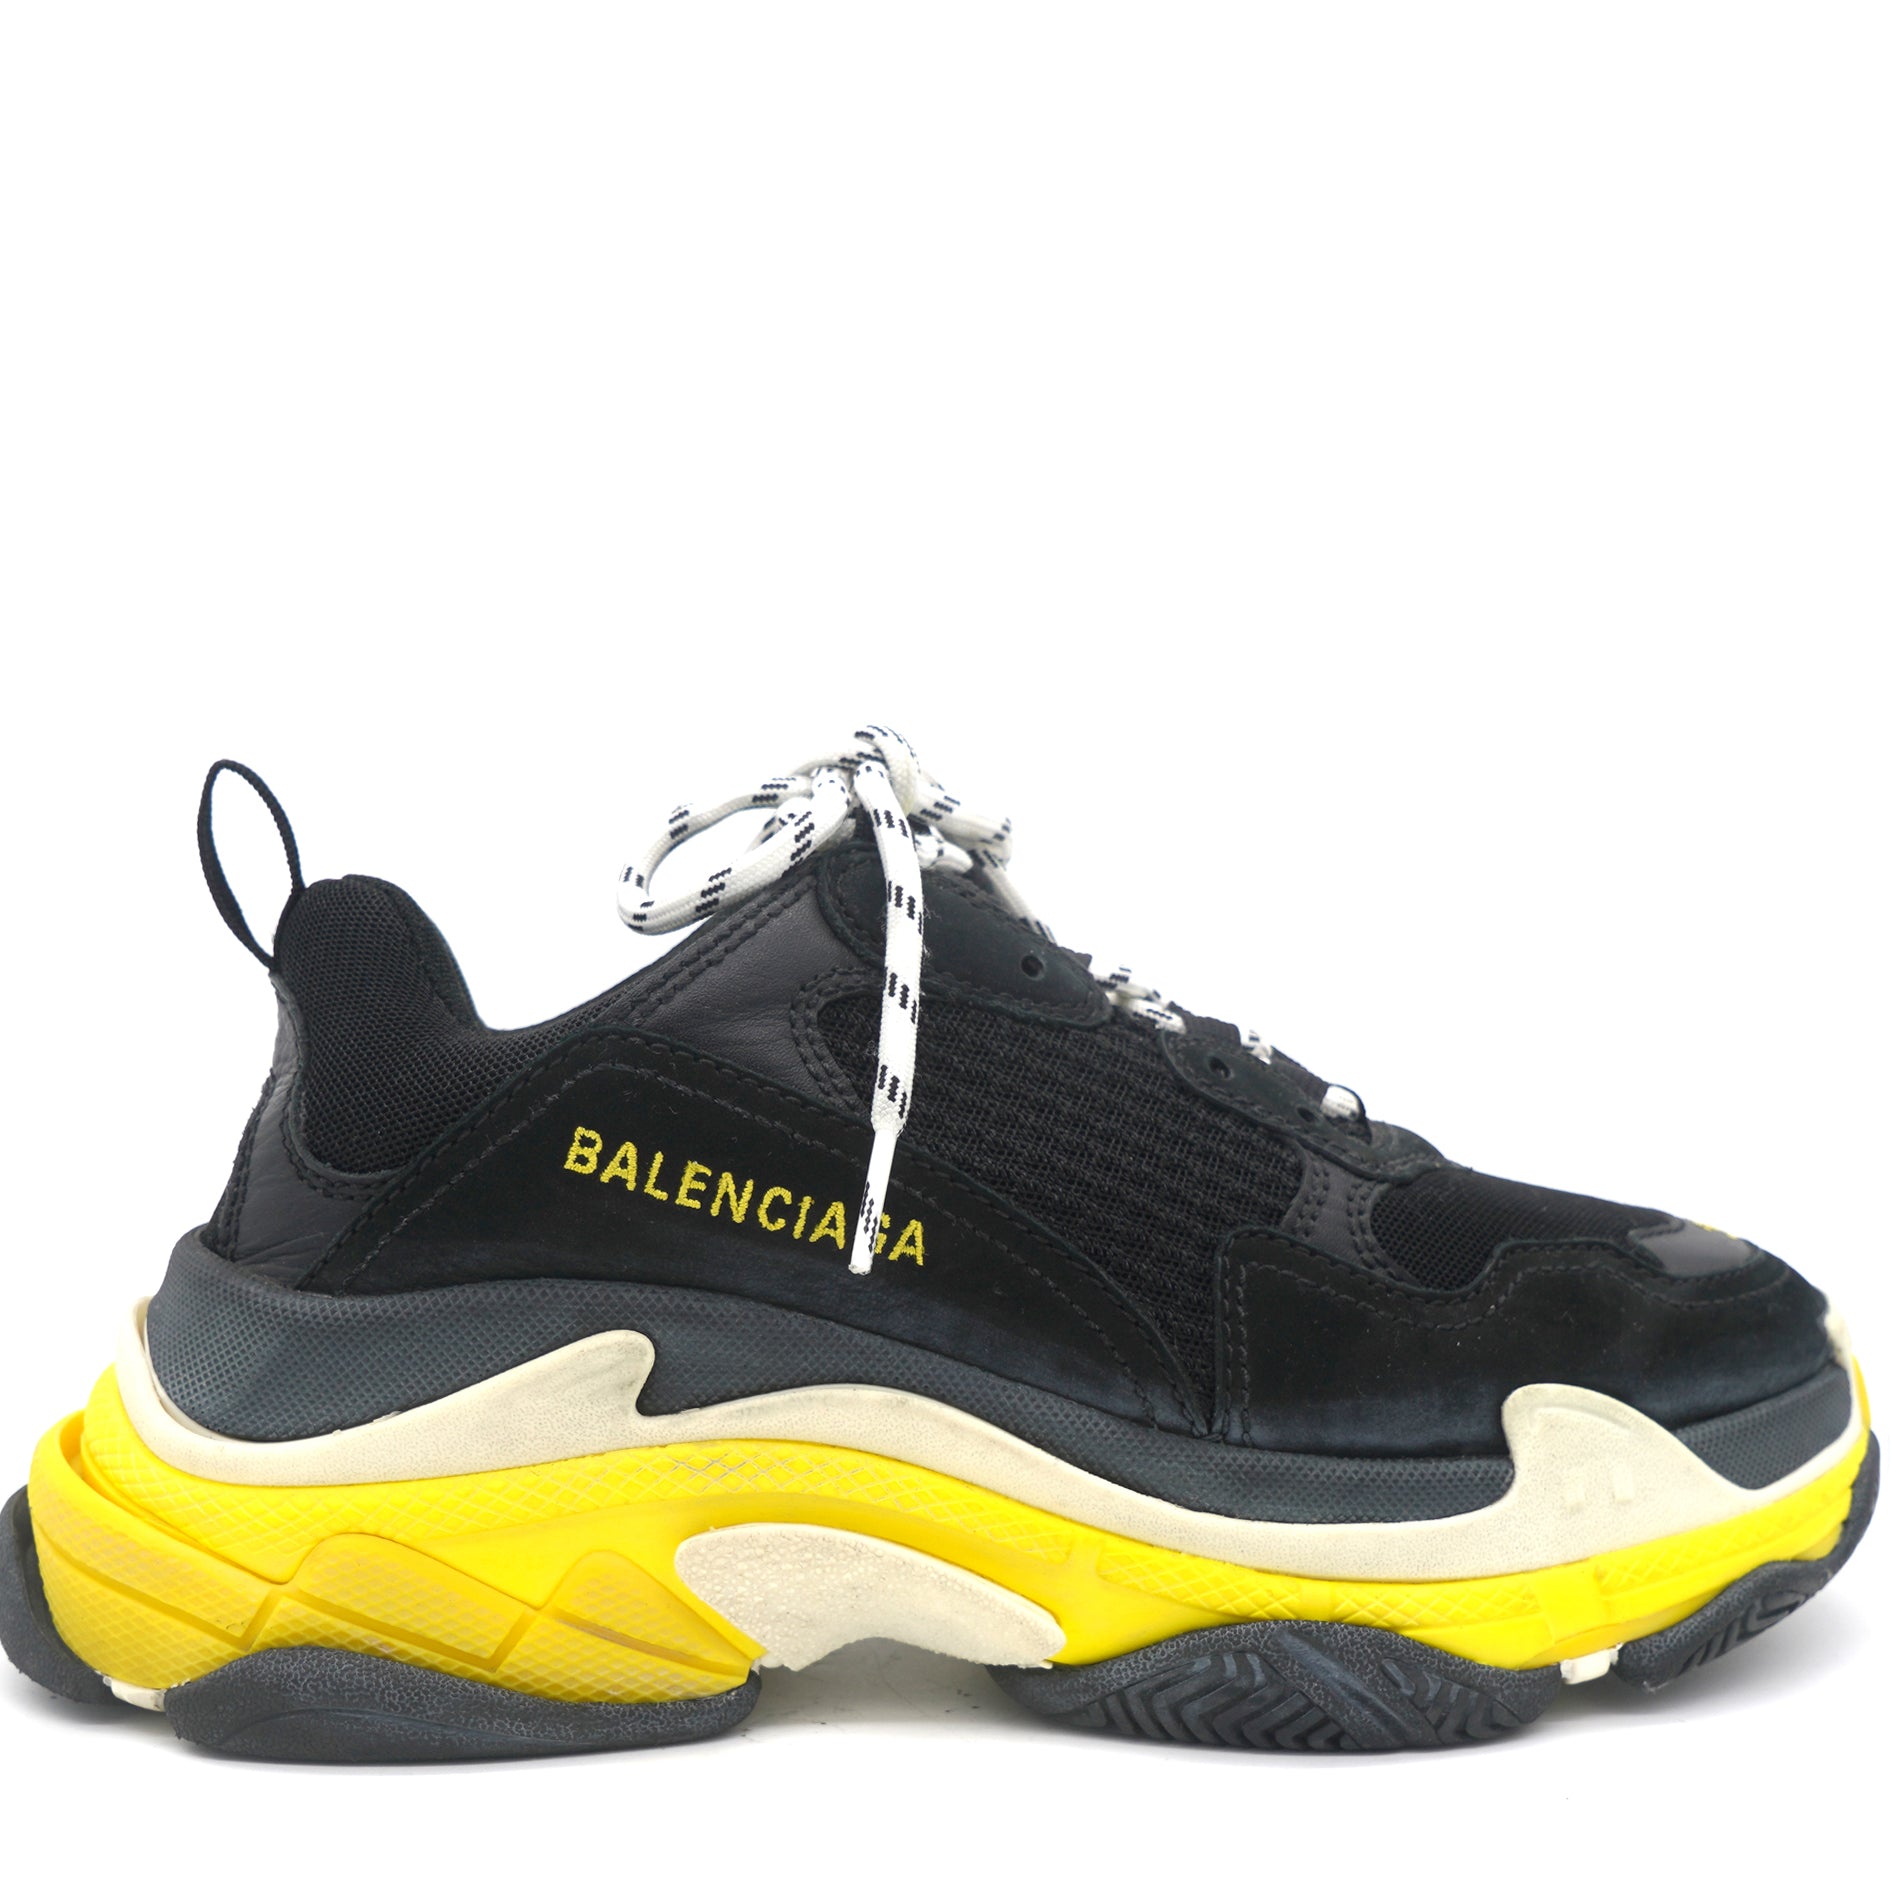 Triple S multi-panel sneakers Black and Yellow 38